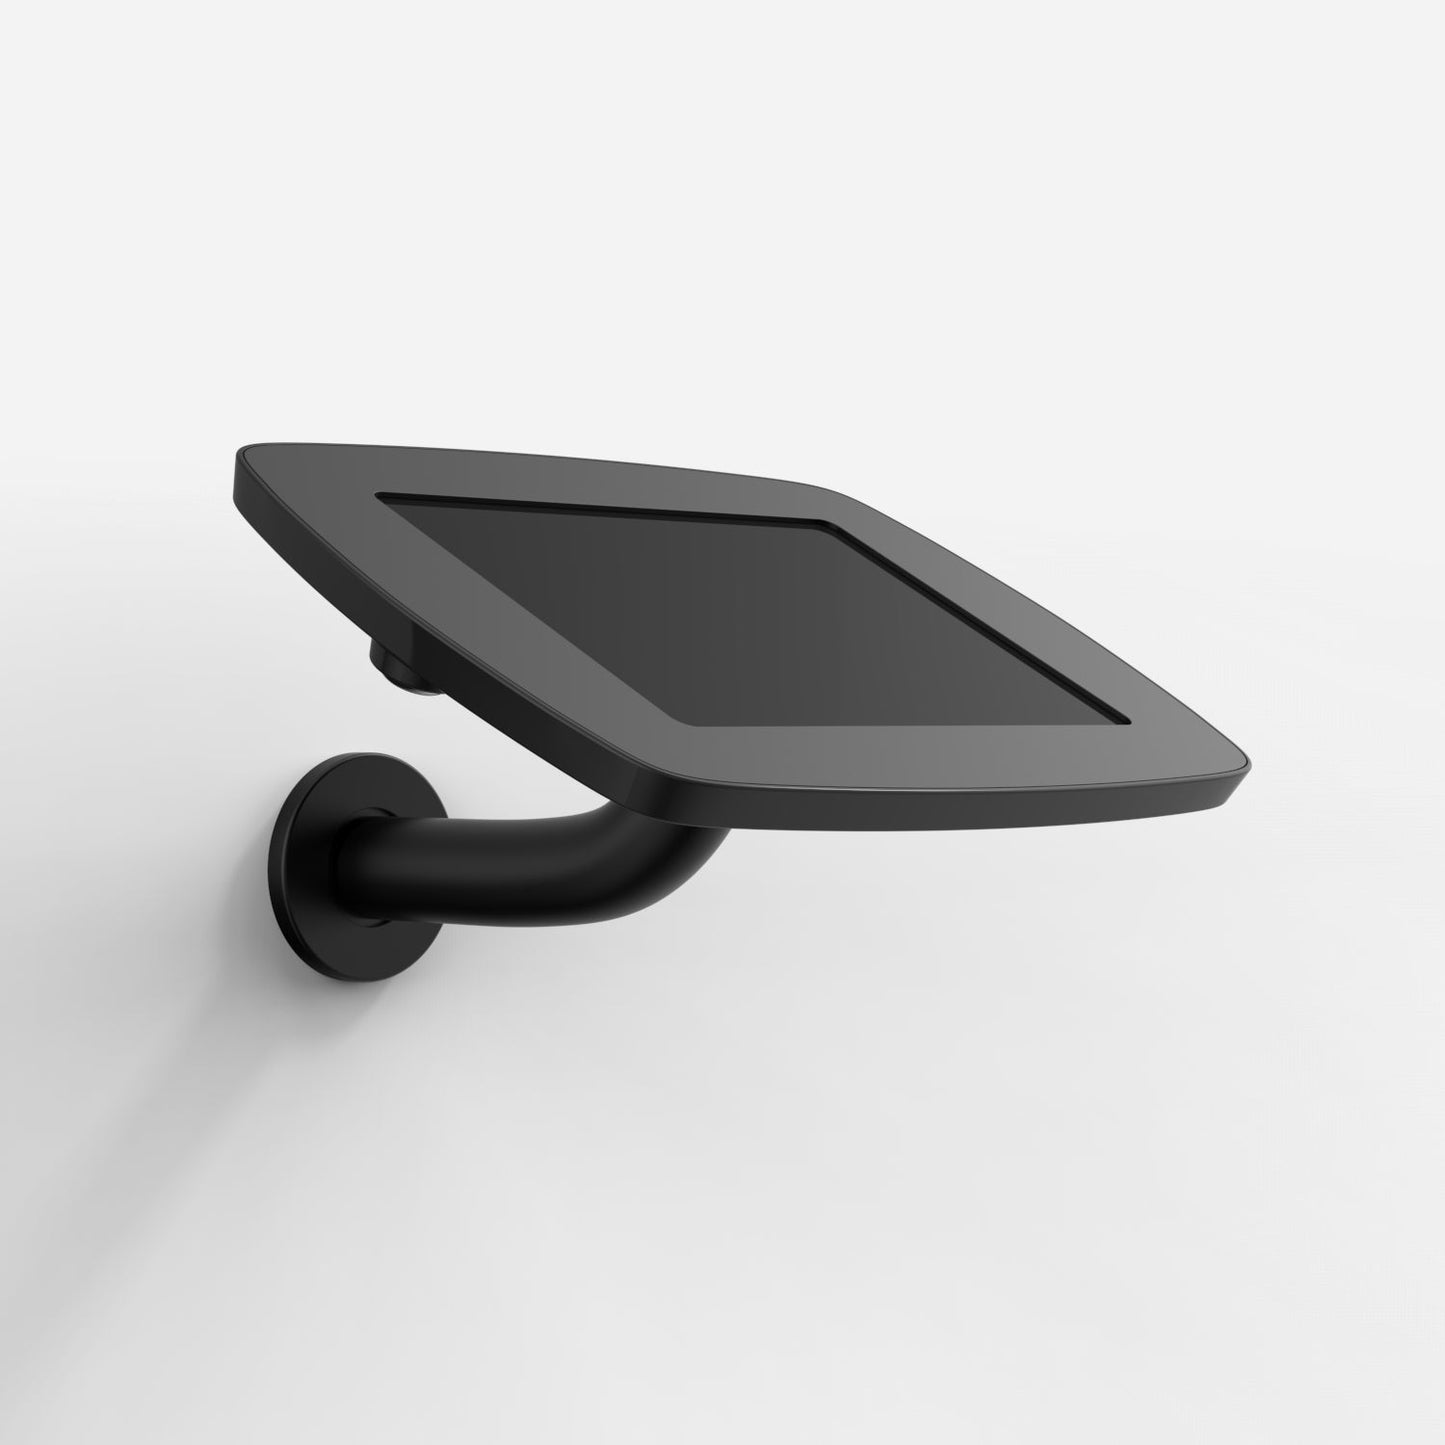 Bouncepad Branch - A secure tablet & iPad wall mount in Black.